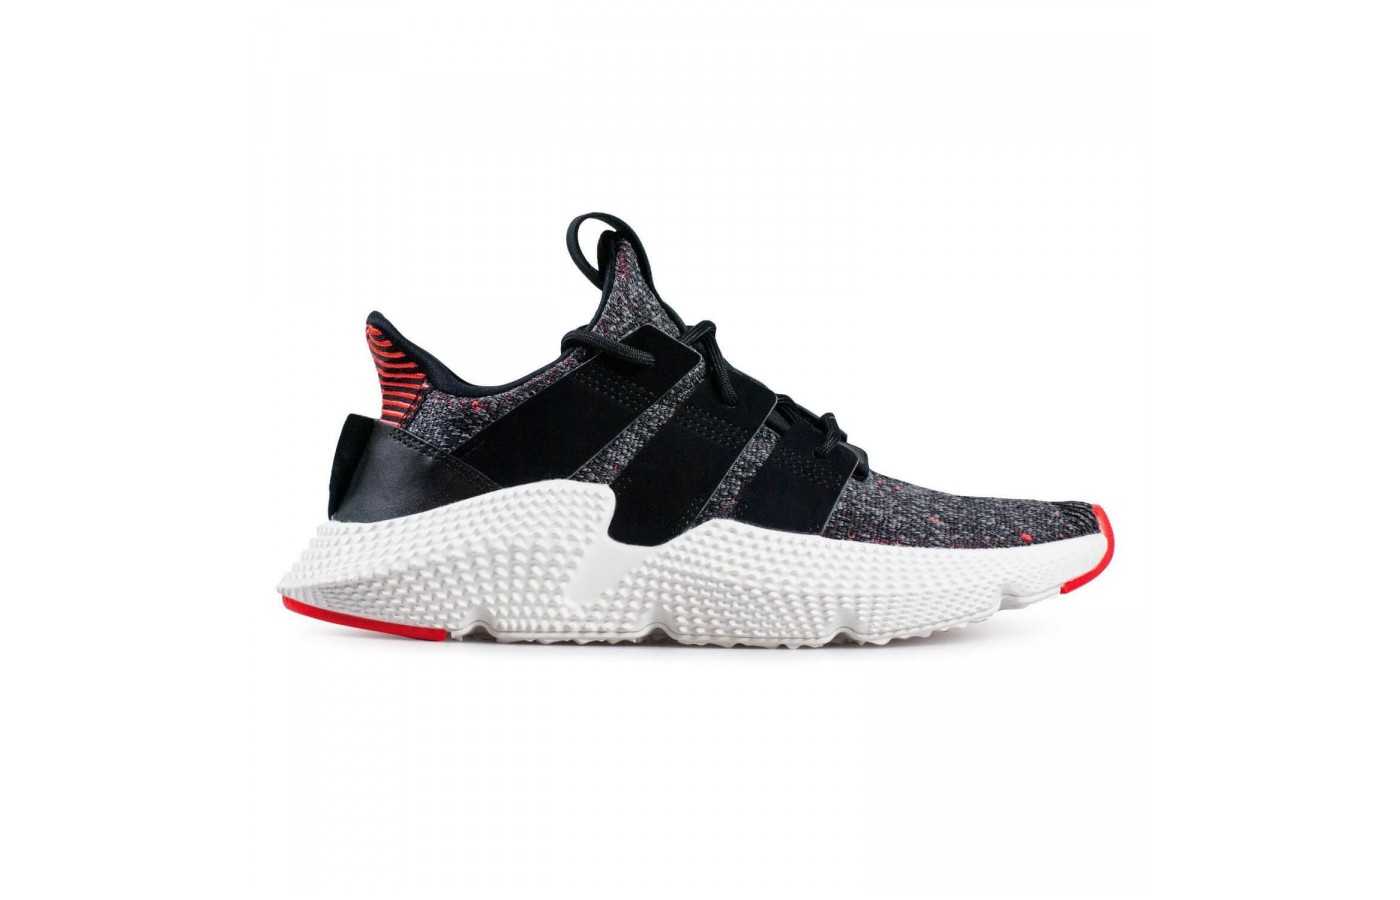 The Adidas Prophere has a flexible knit upper 